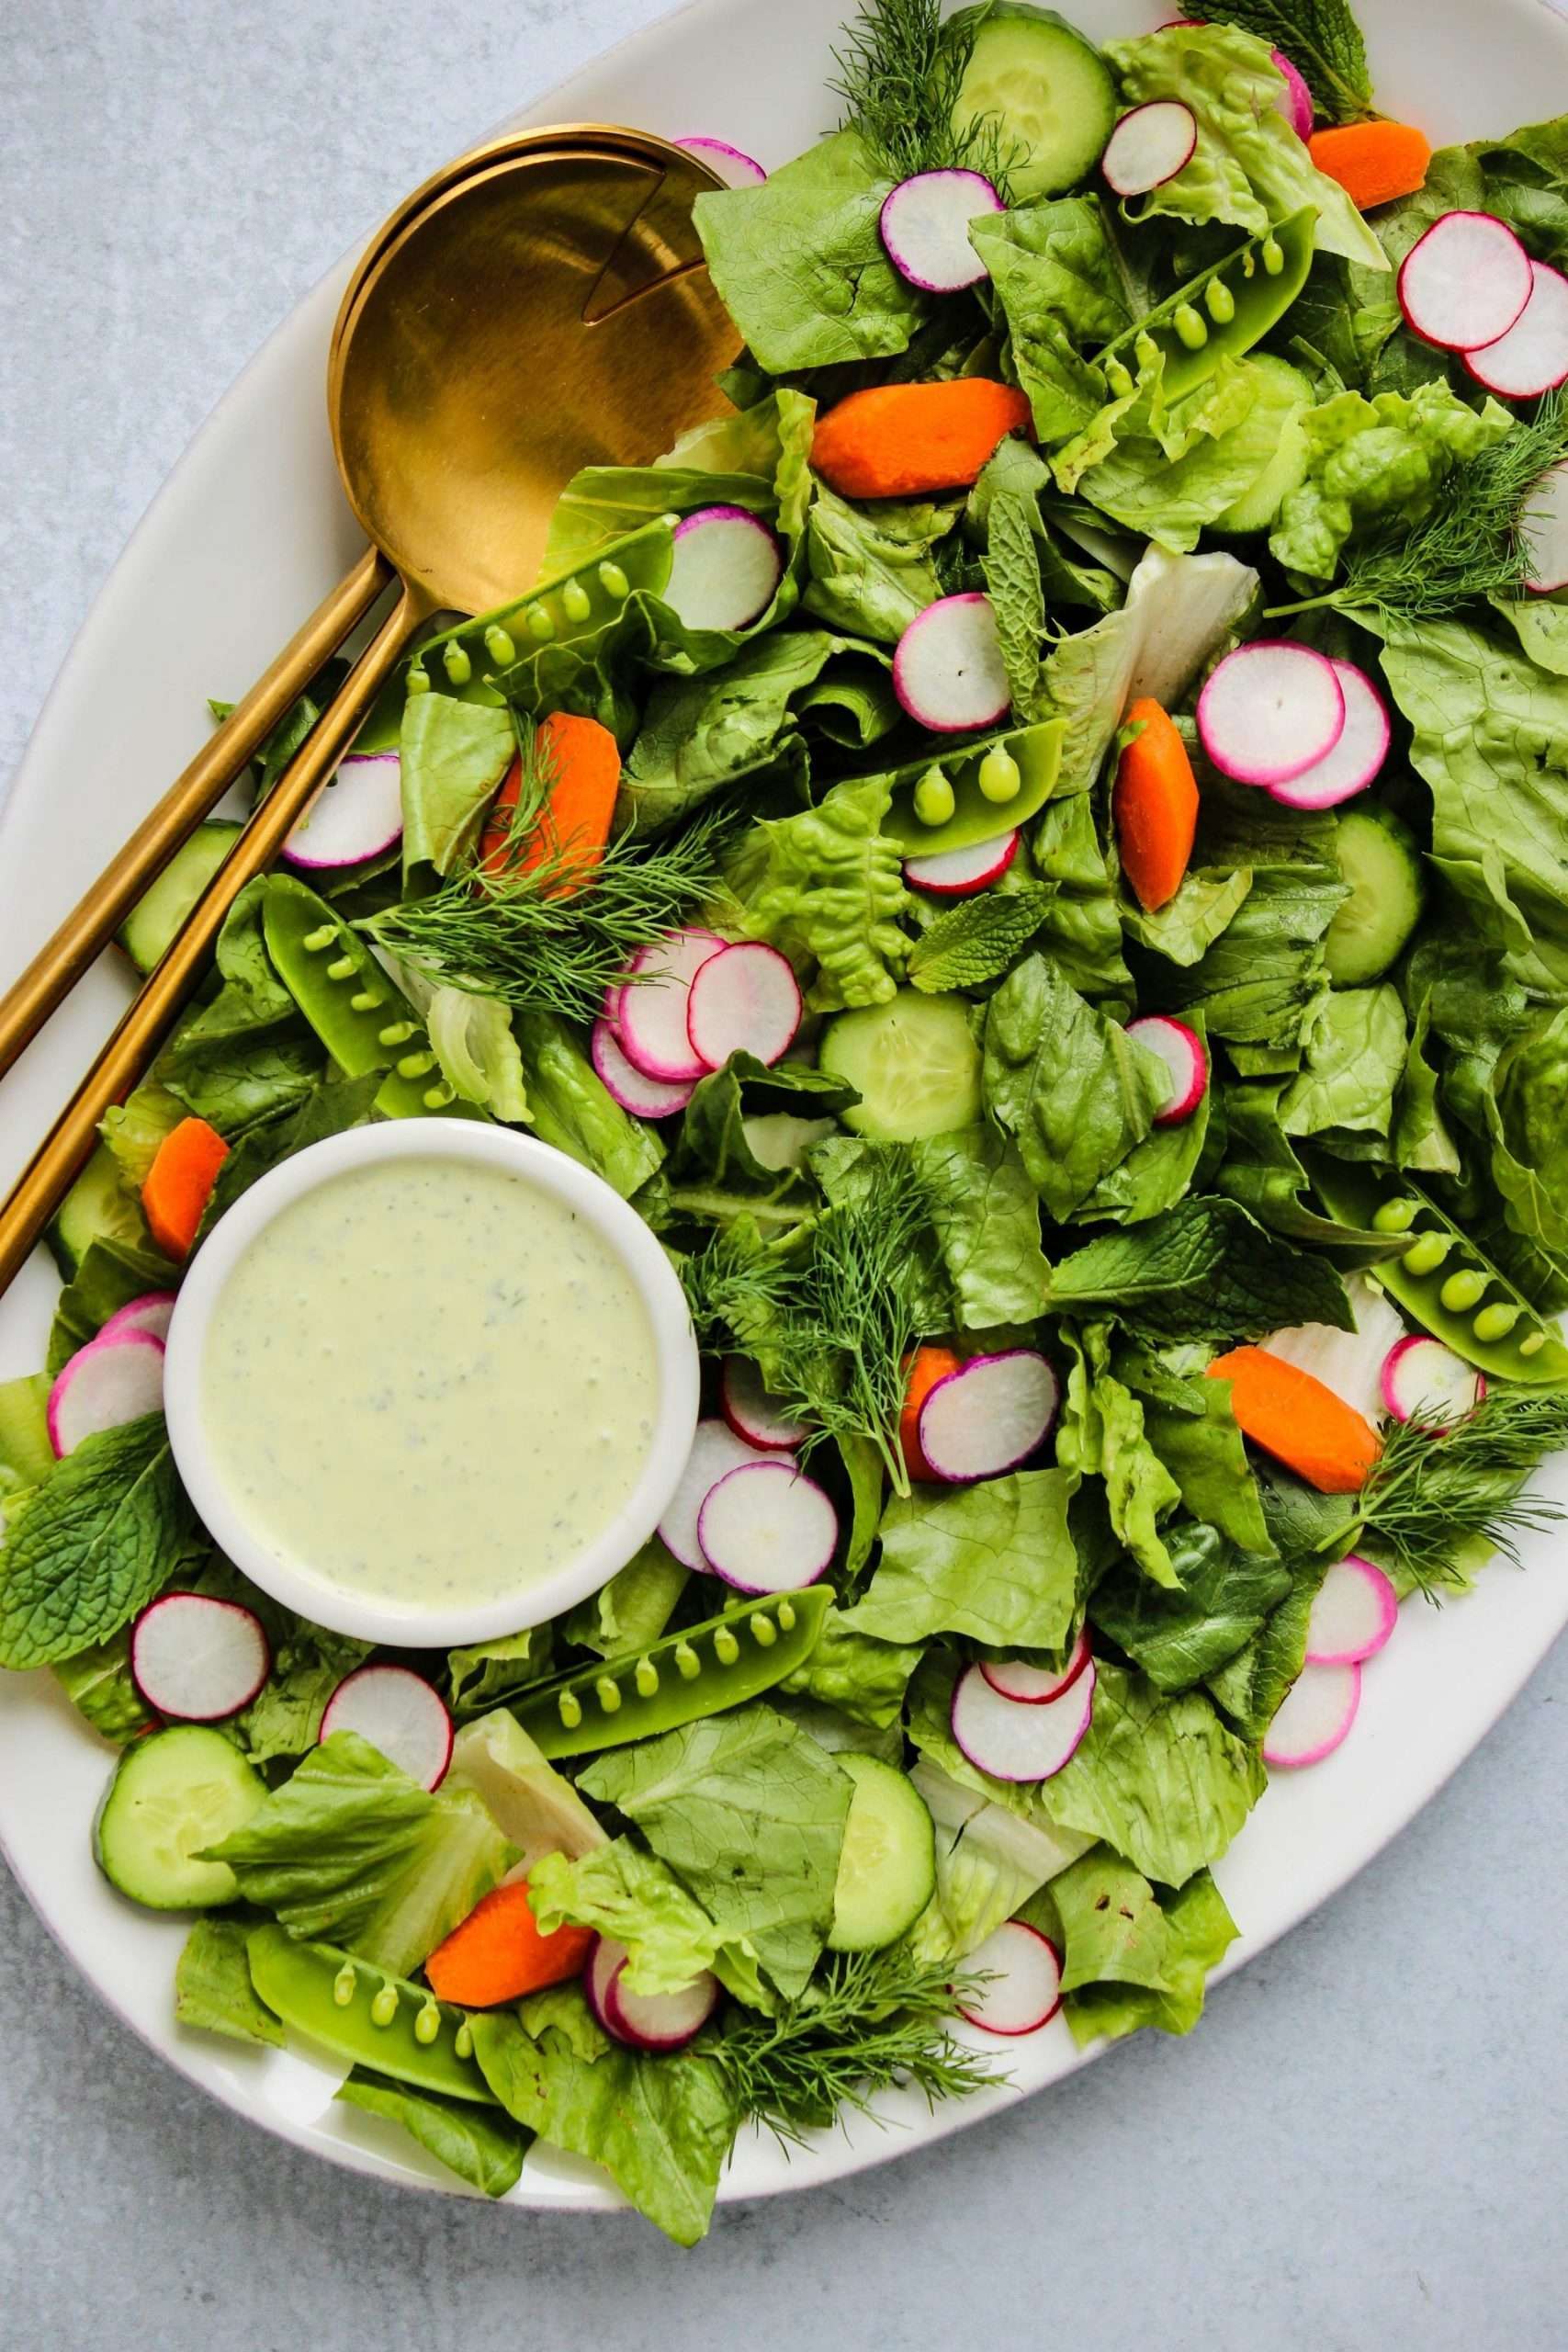 This healthy homemade salad dressing is made with siggis ...